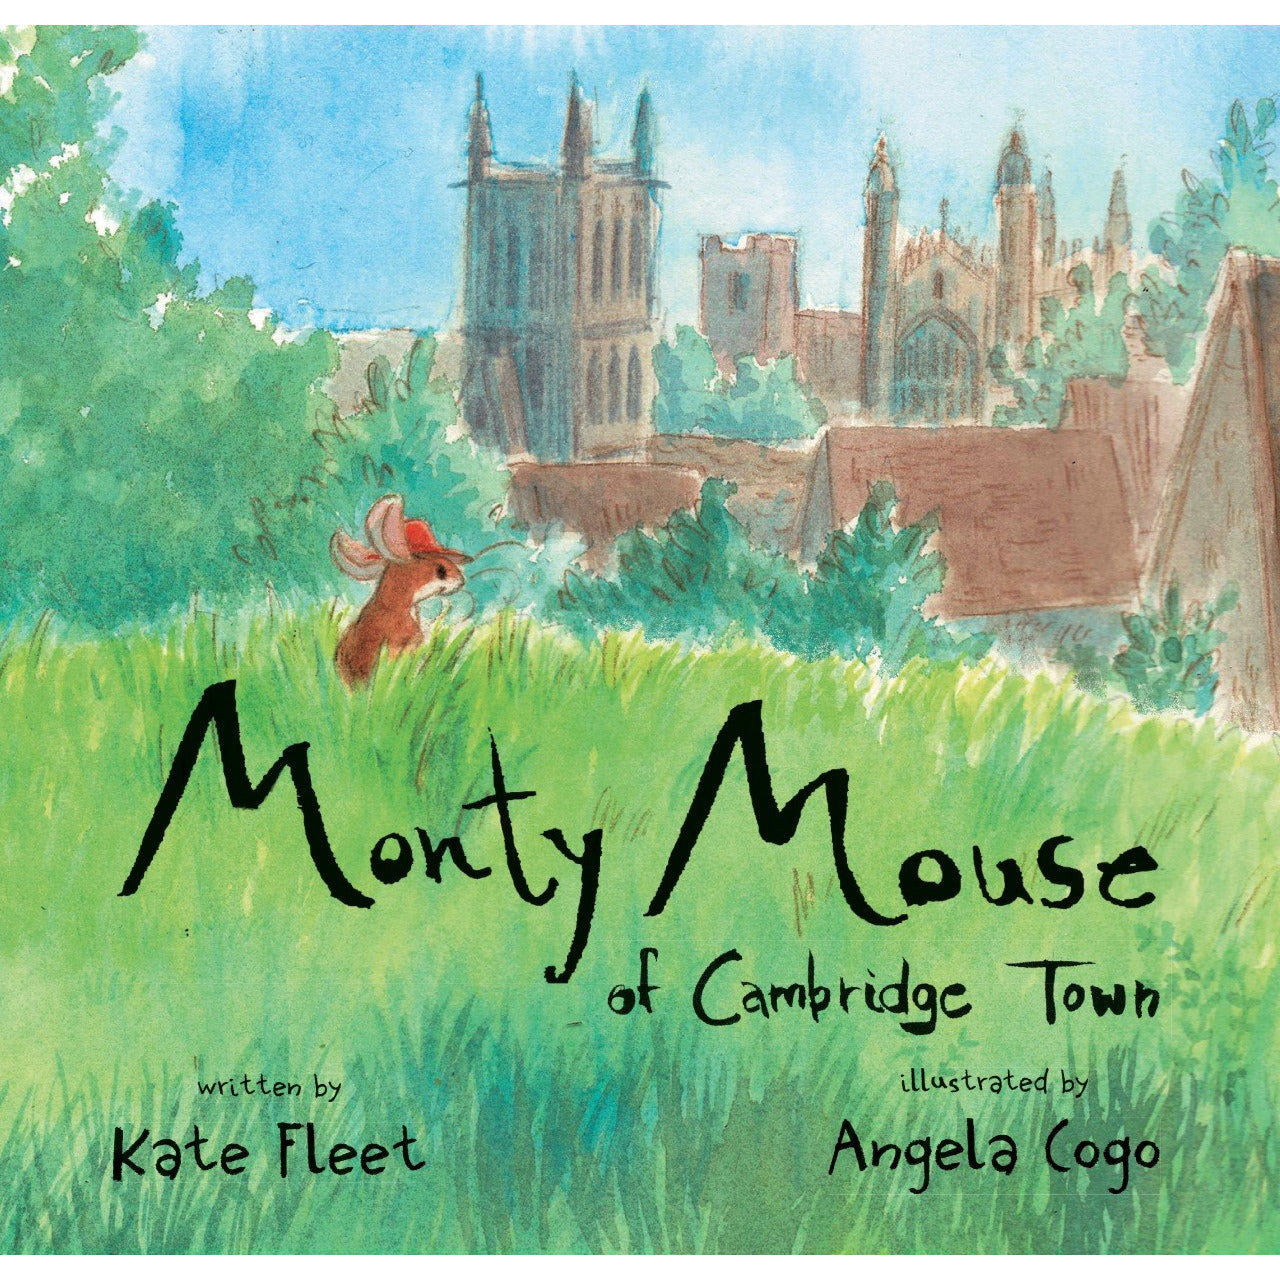 Cover illustration - Monty Mouse of Cambridge Town, written by Kate Fleet and illustration by Angela Cogo. Cover illustration is a little brown mouse with red hat on a grassy hill, looking out over the Cambridge skyline, including Kings College Chapel. 